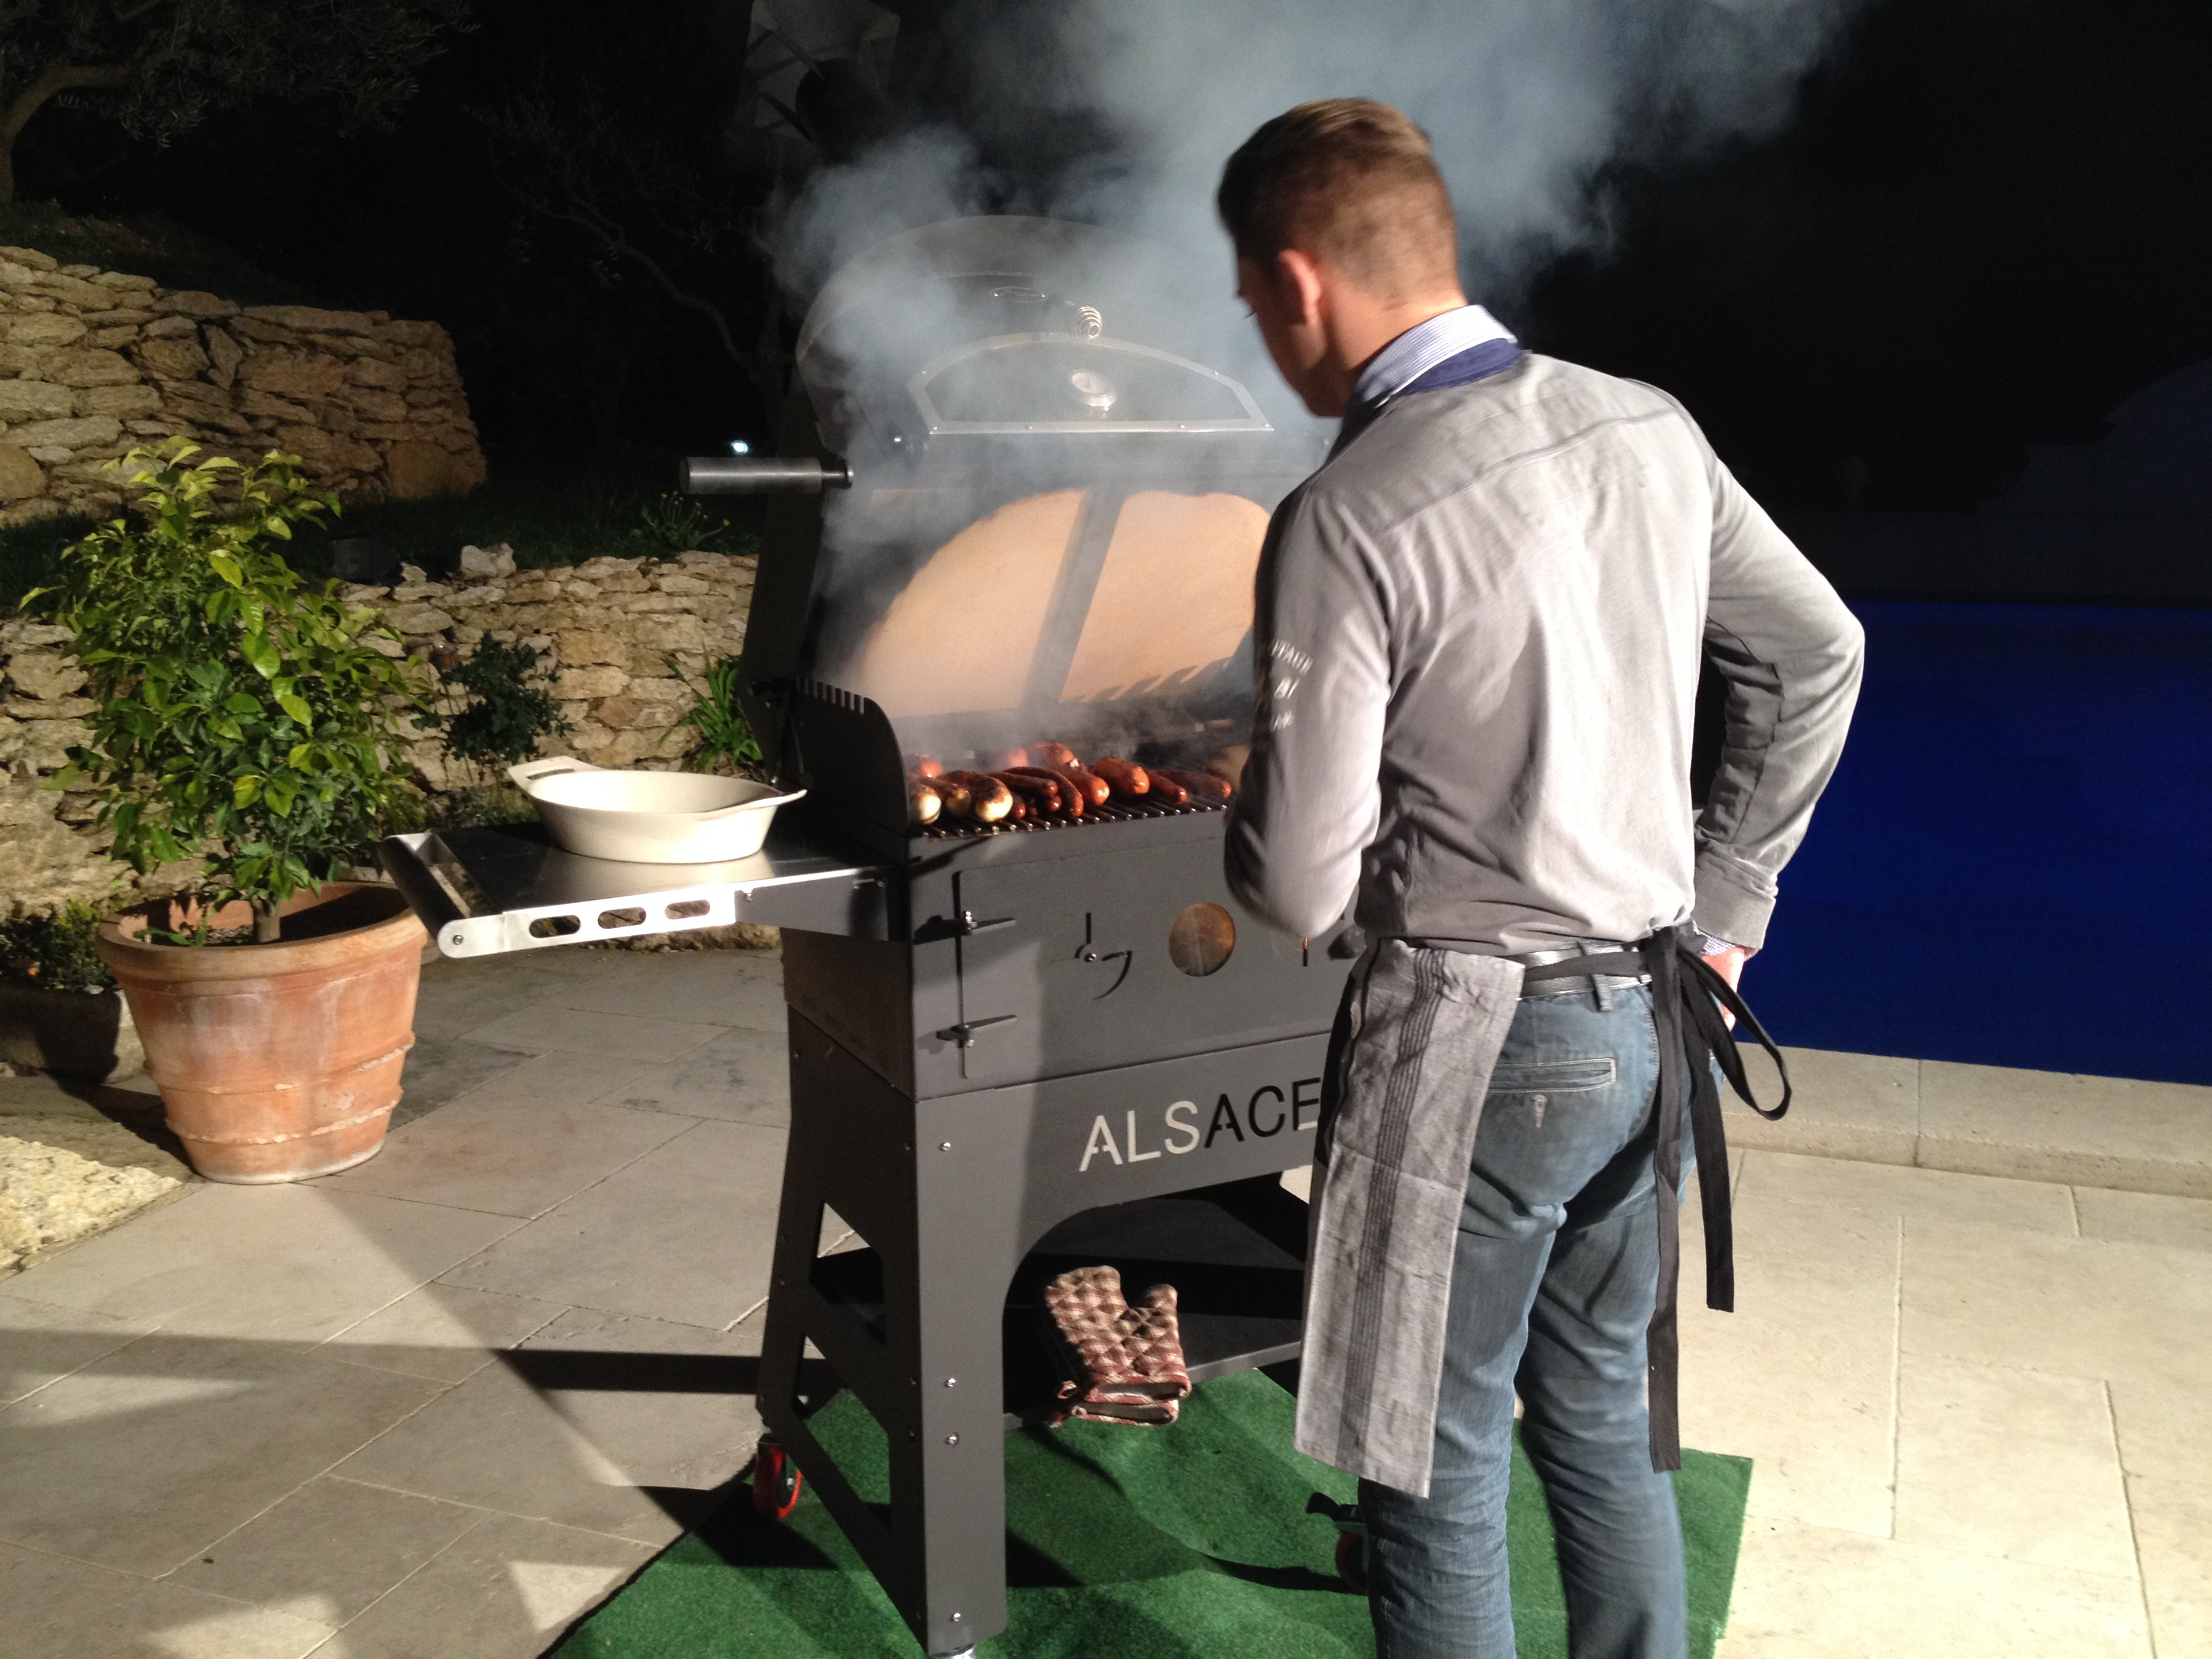 Alsace, outdoor wood-fired oven/grill in grilling position'